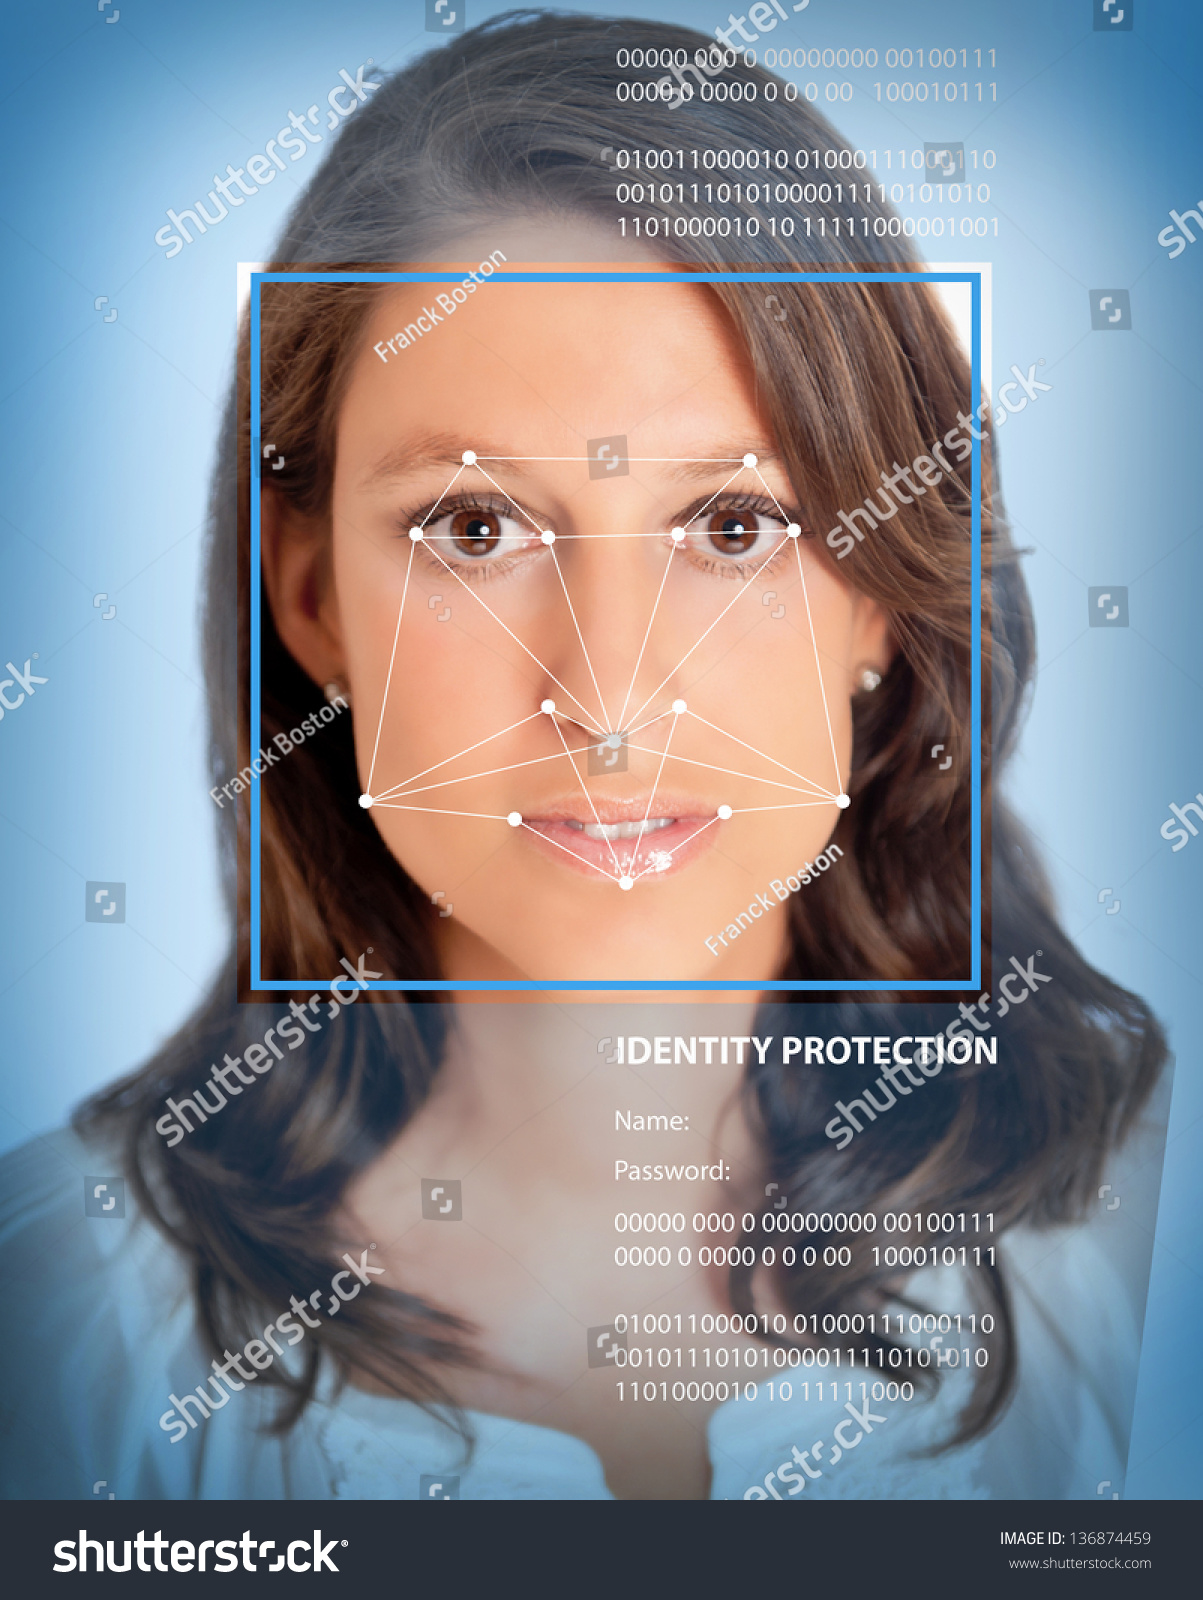 Female Face With Lines From A Facial Recognition Software Stock Photo 136874459 ...1203 x 1600